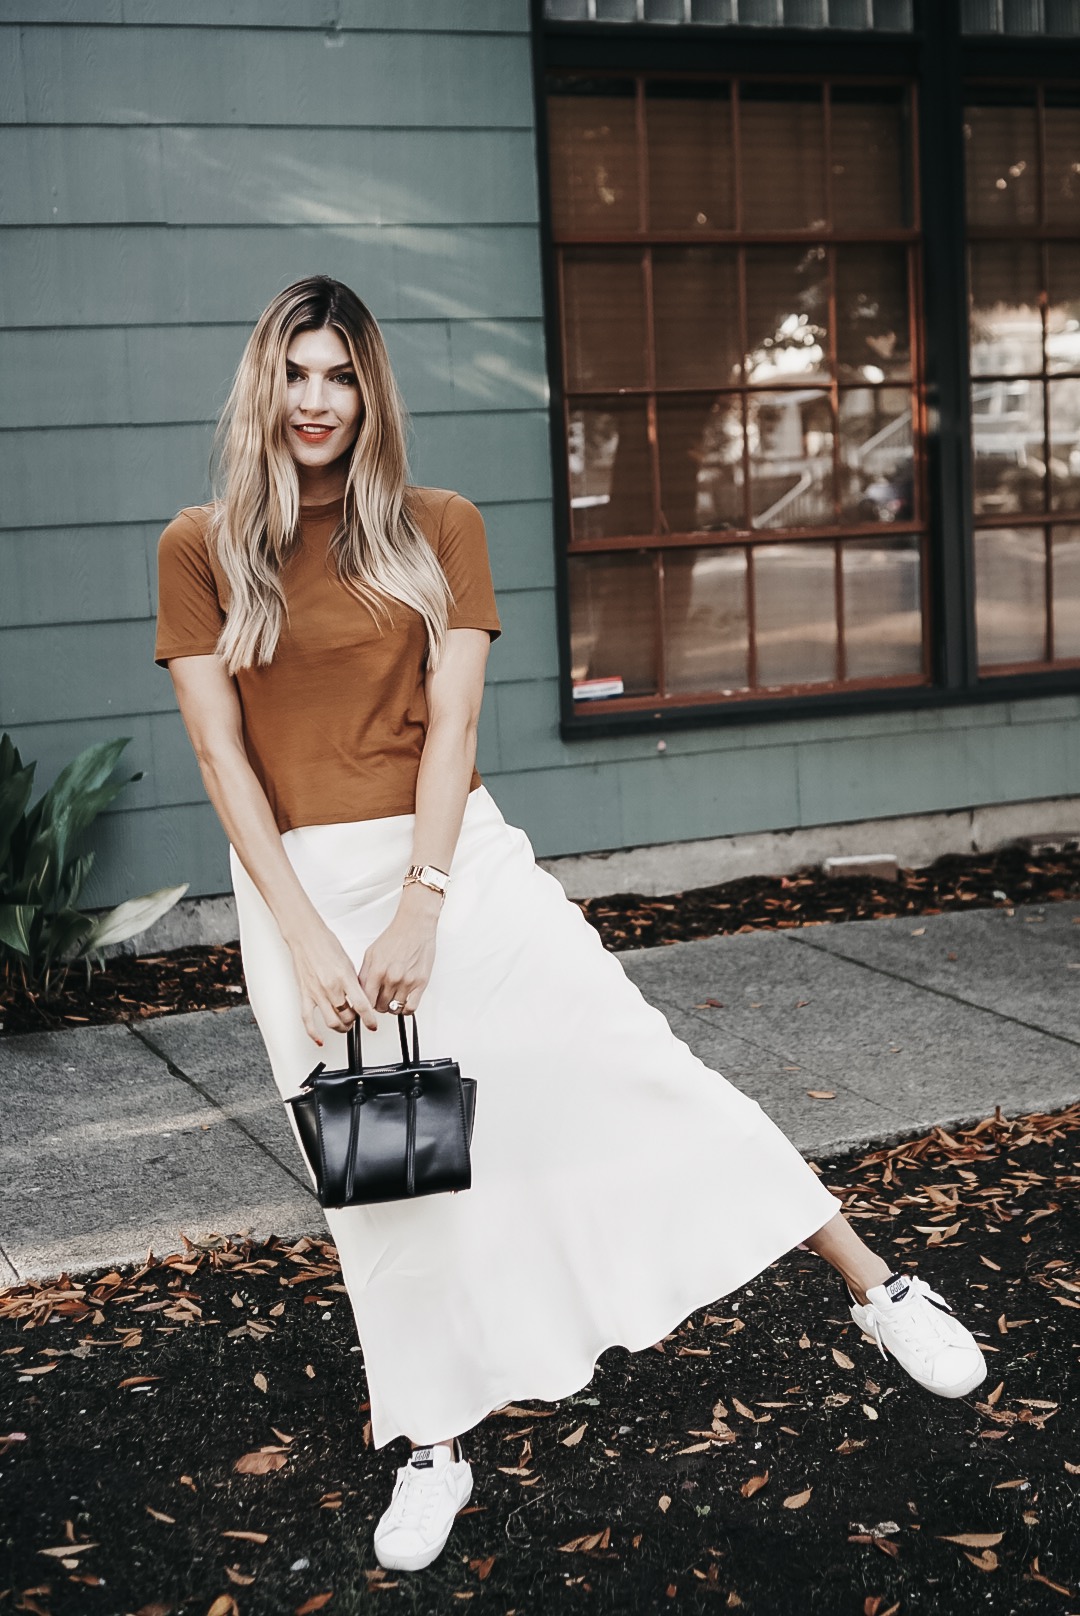 The Grey Edit - & Other Stories Satin Midi Skirt - H&M Tee - Golden Goose Sneakers - Mini Tote Bag - Fall Style